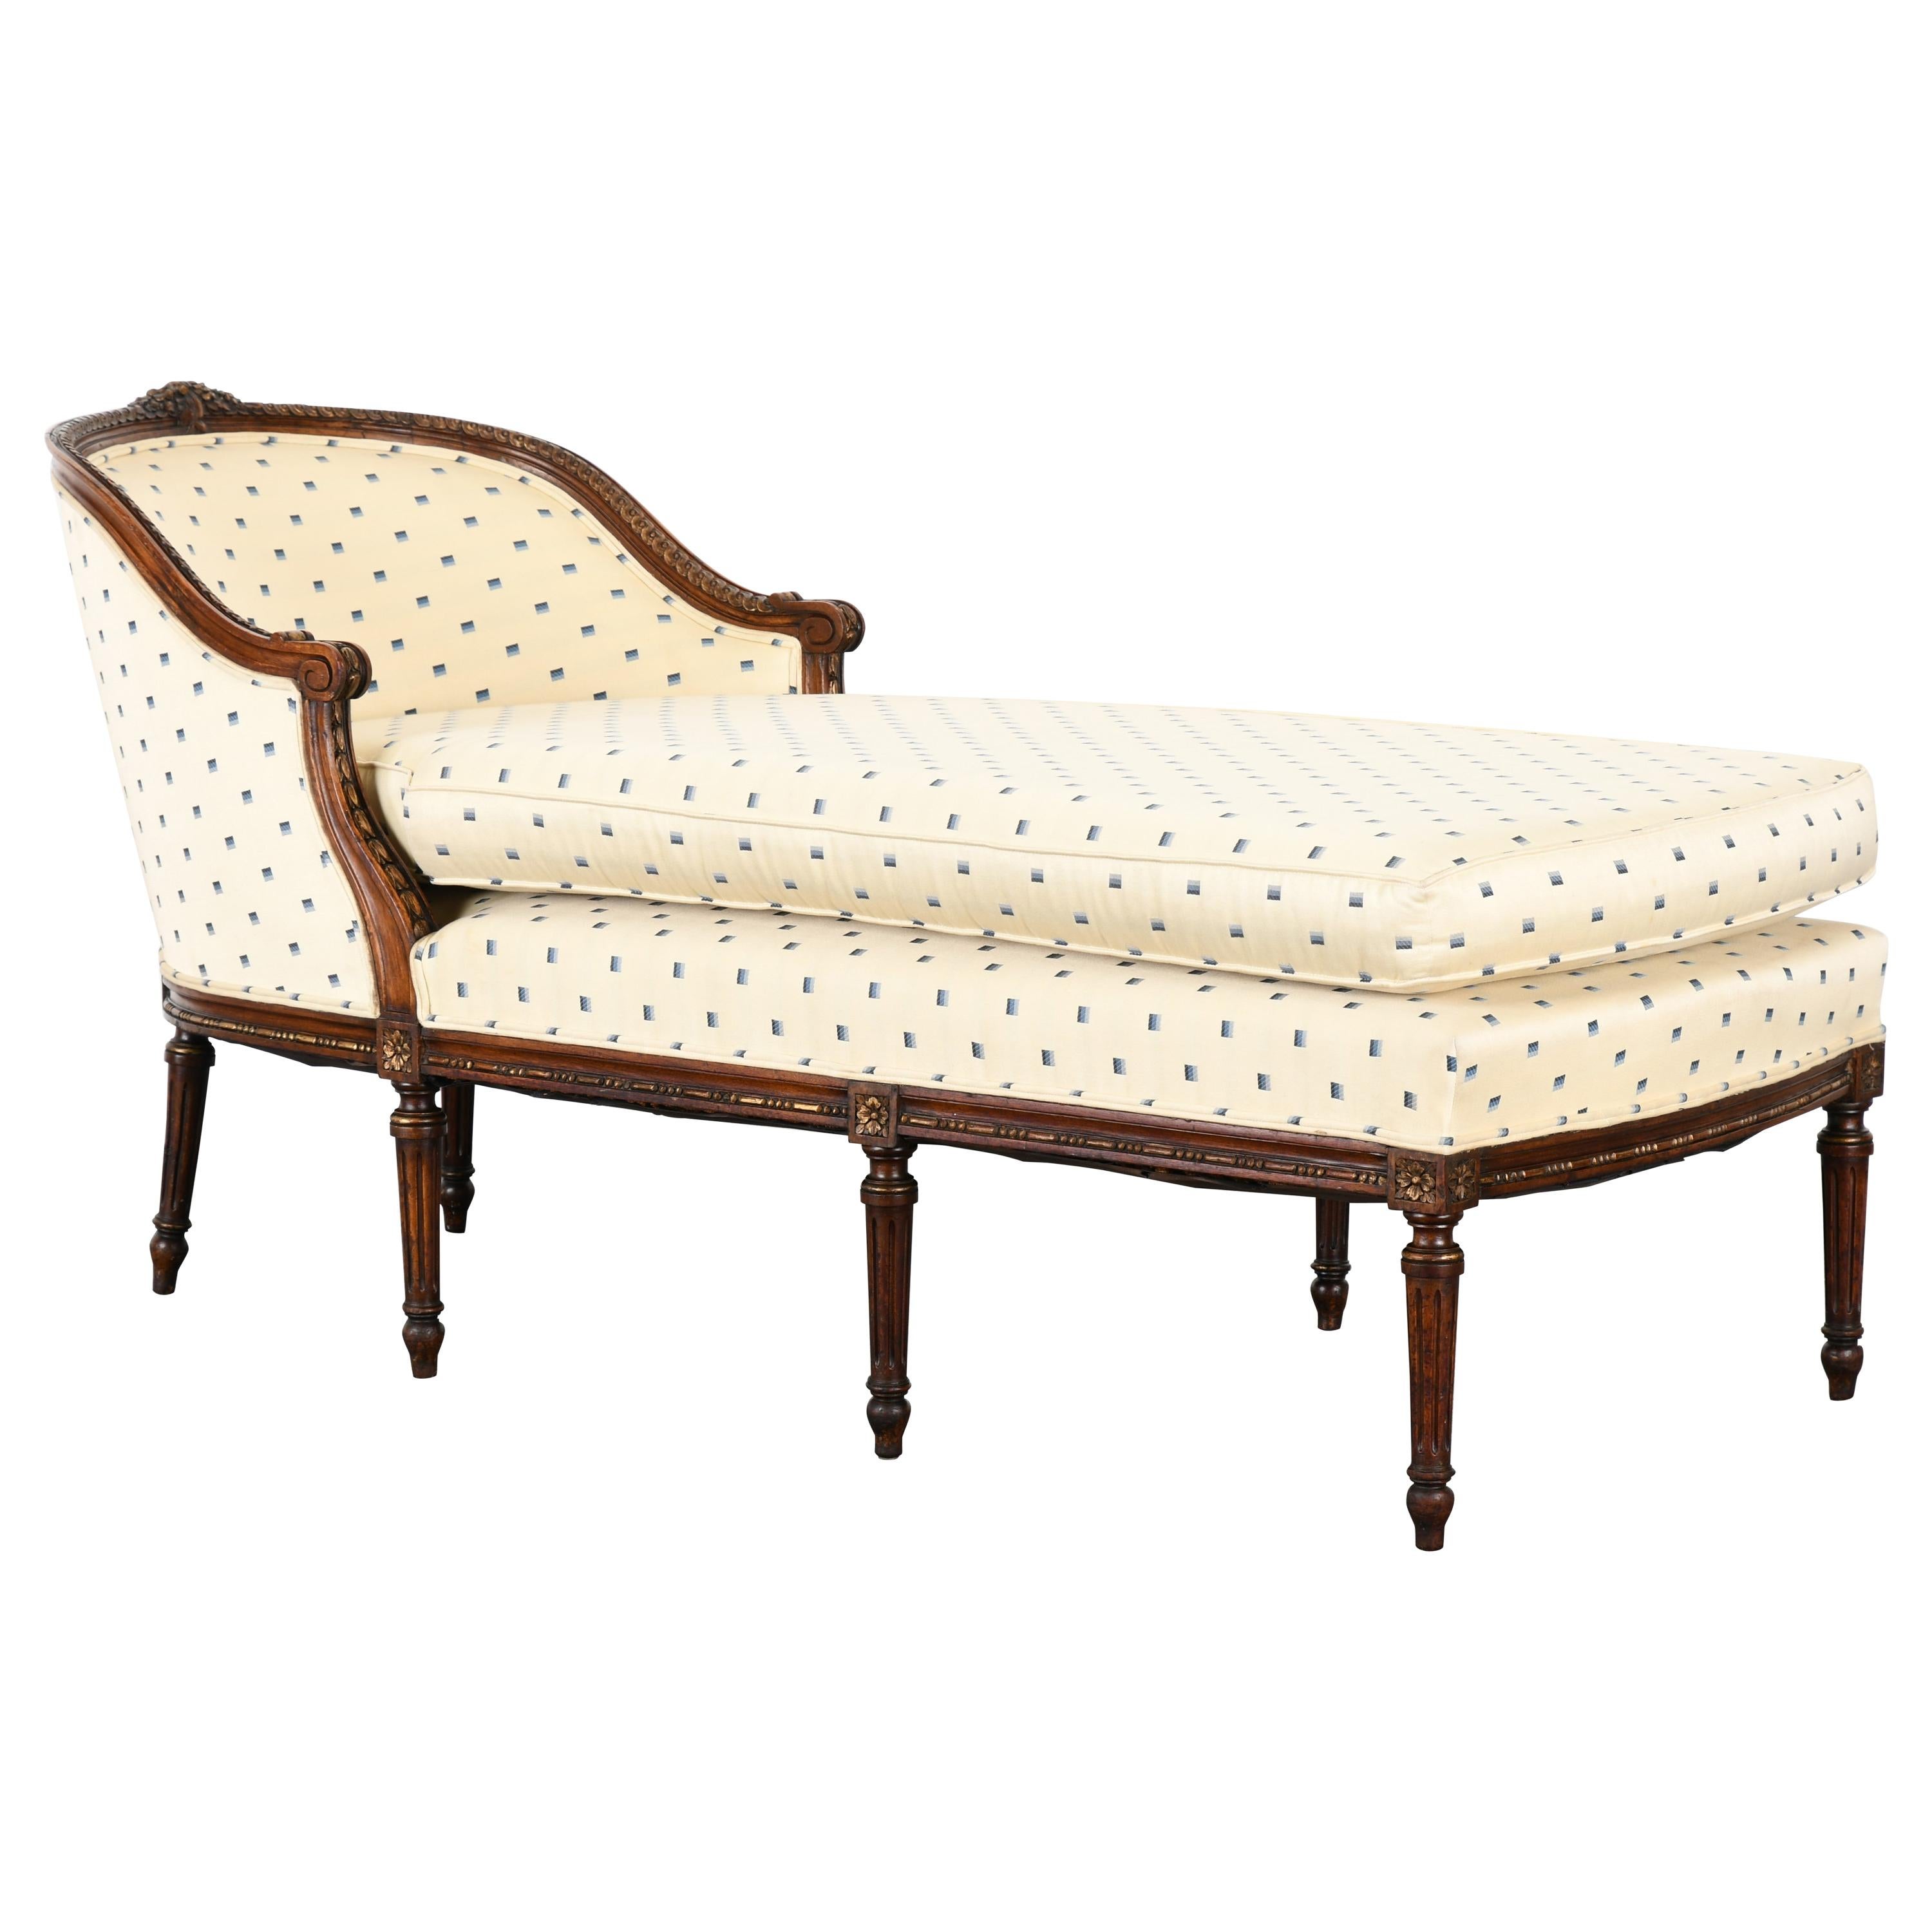 French Louis XVI Style Chaise Lounge, 19th Century